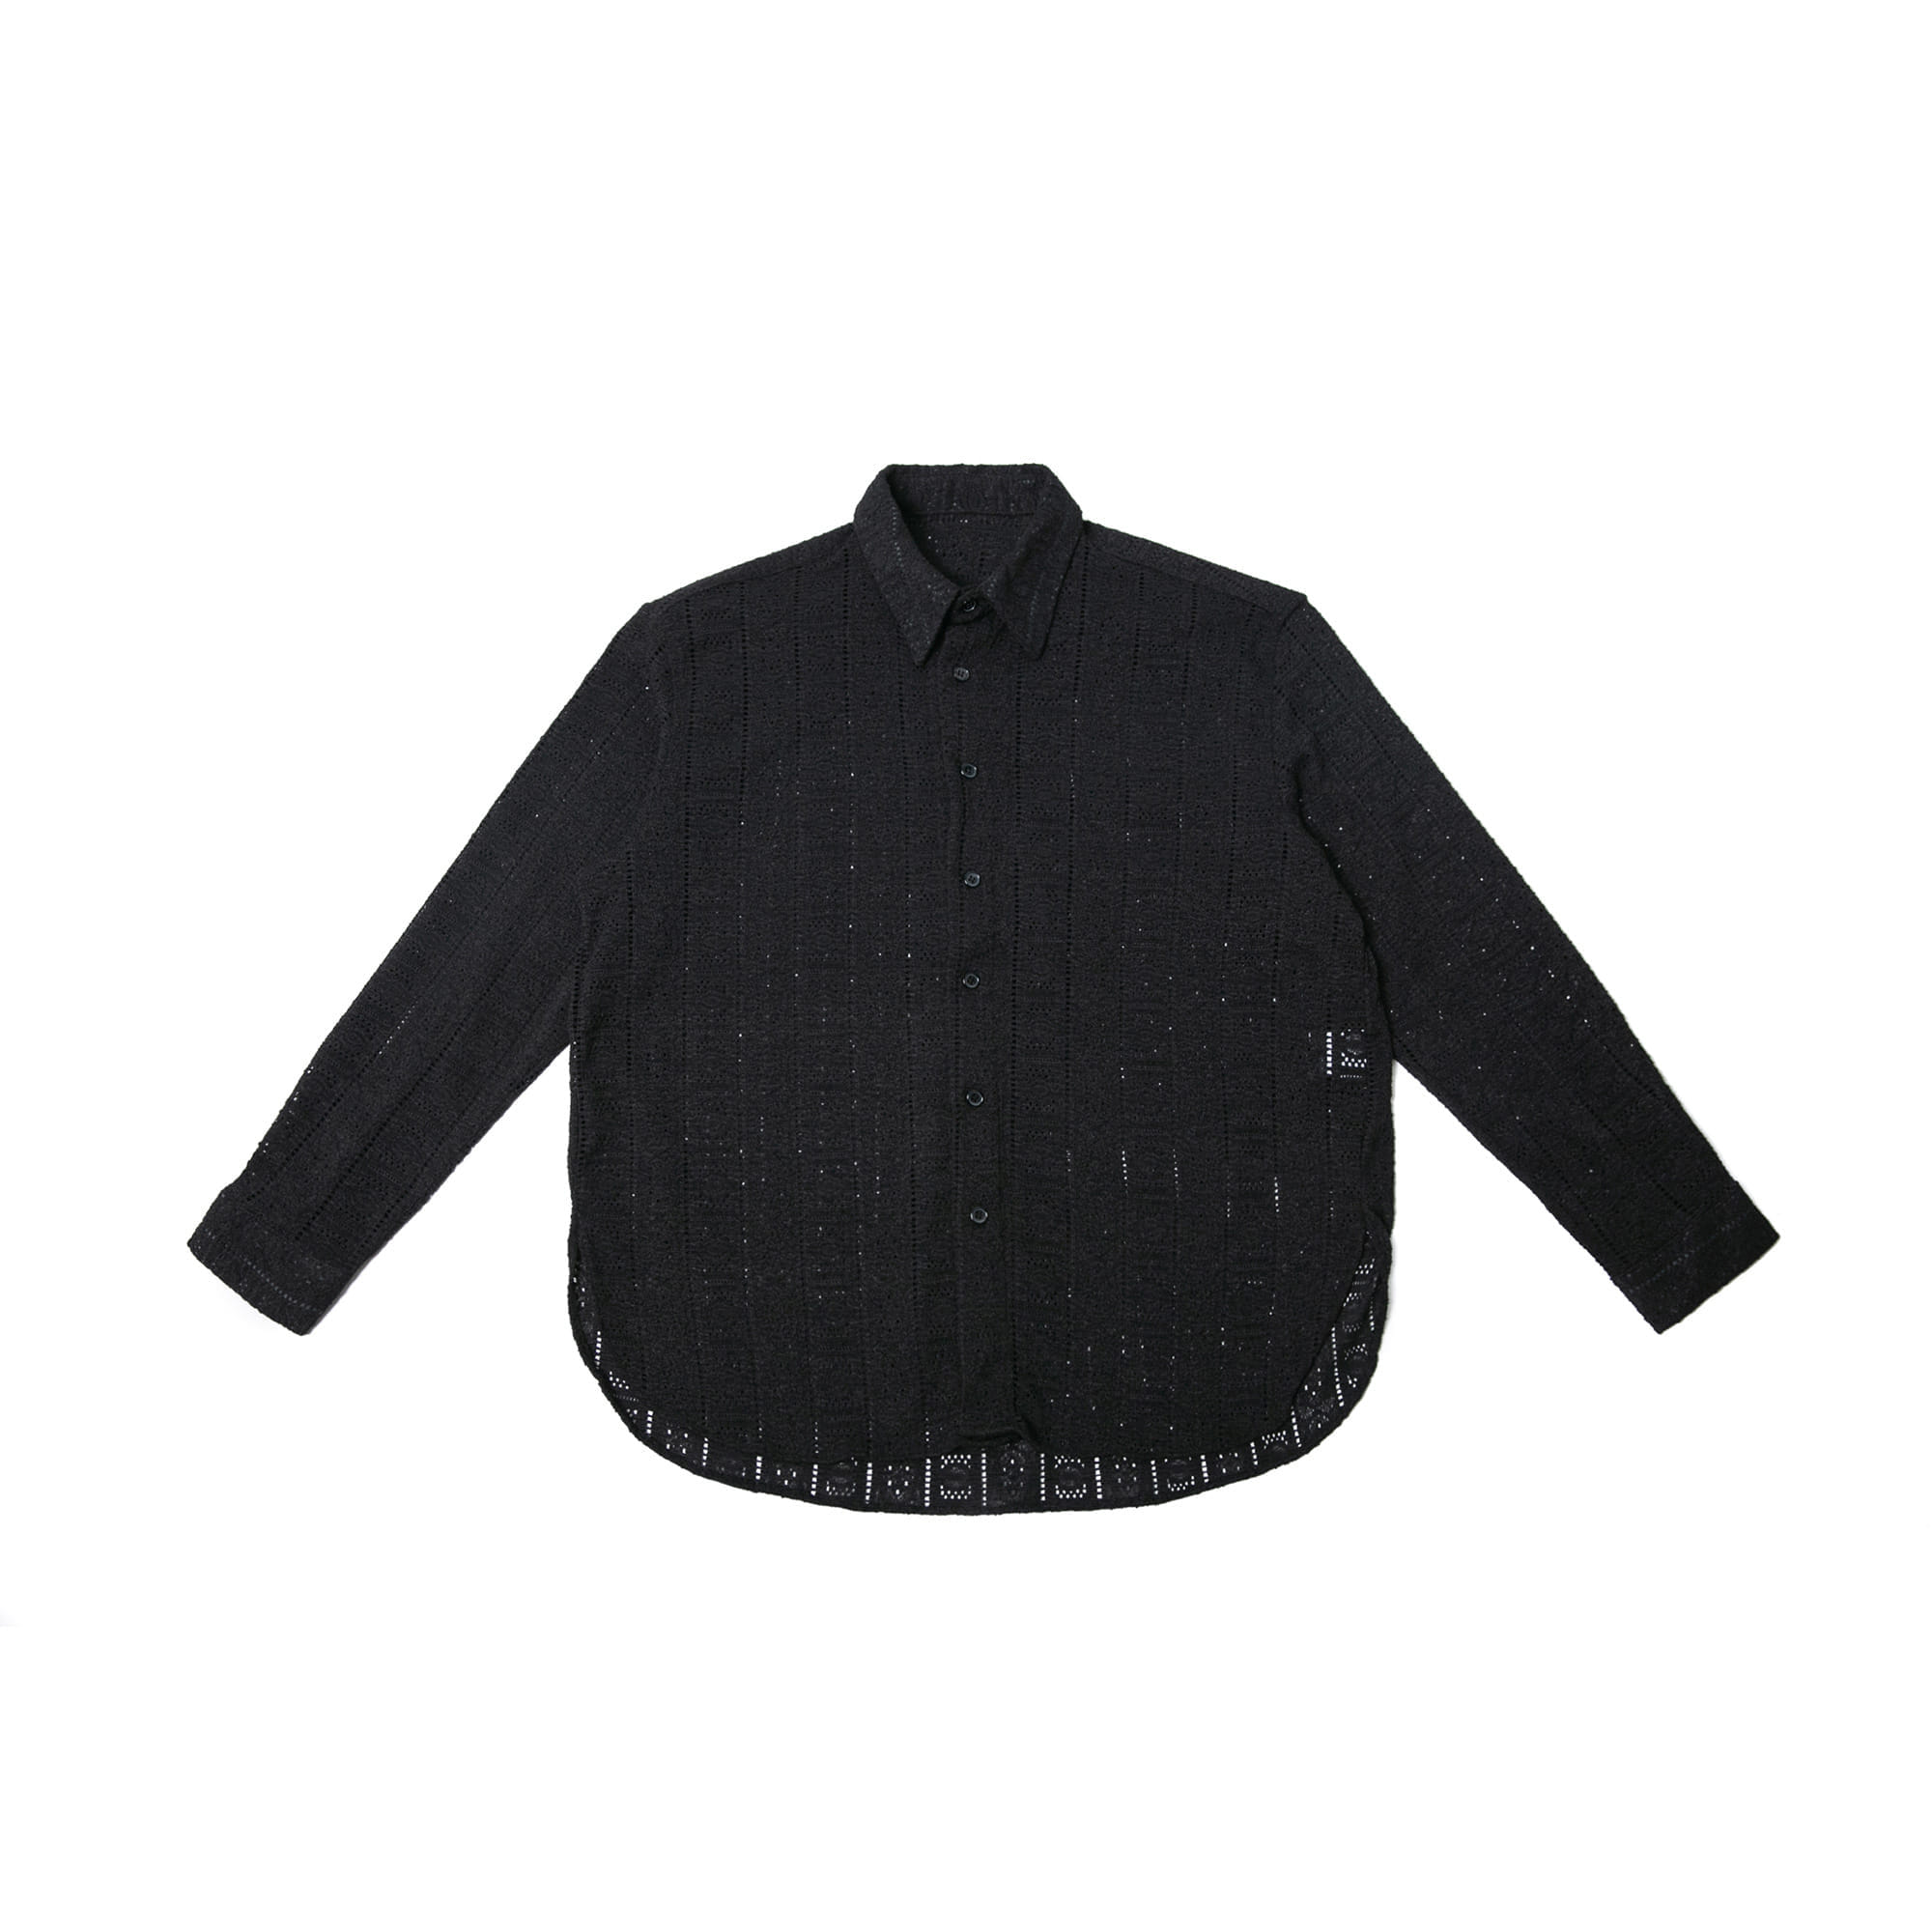 Lace Over Shirt - Black